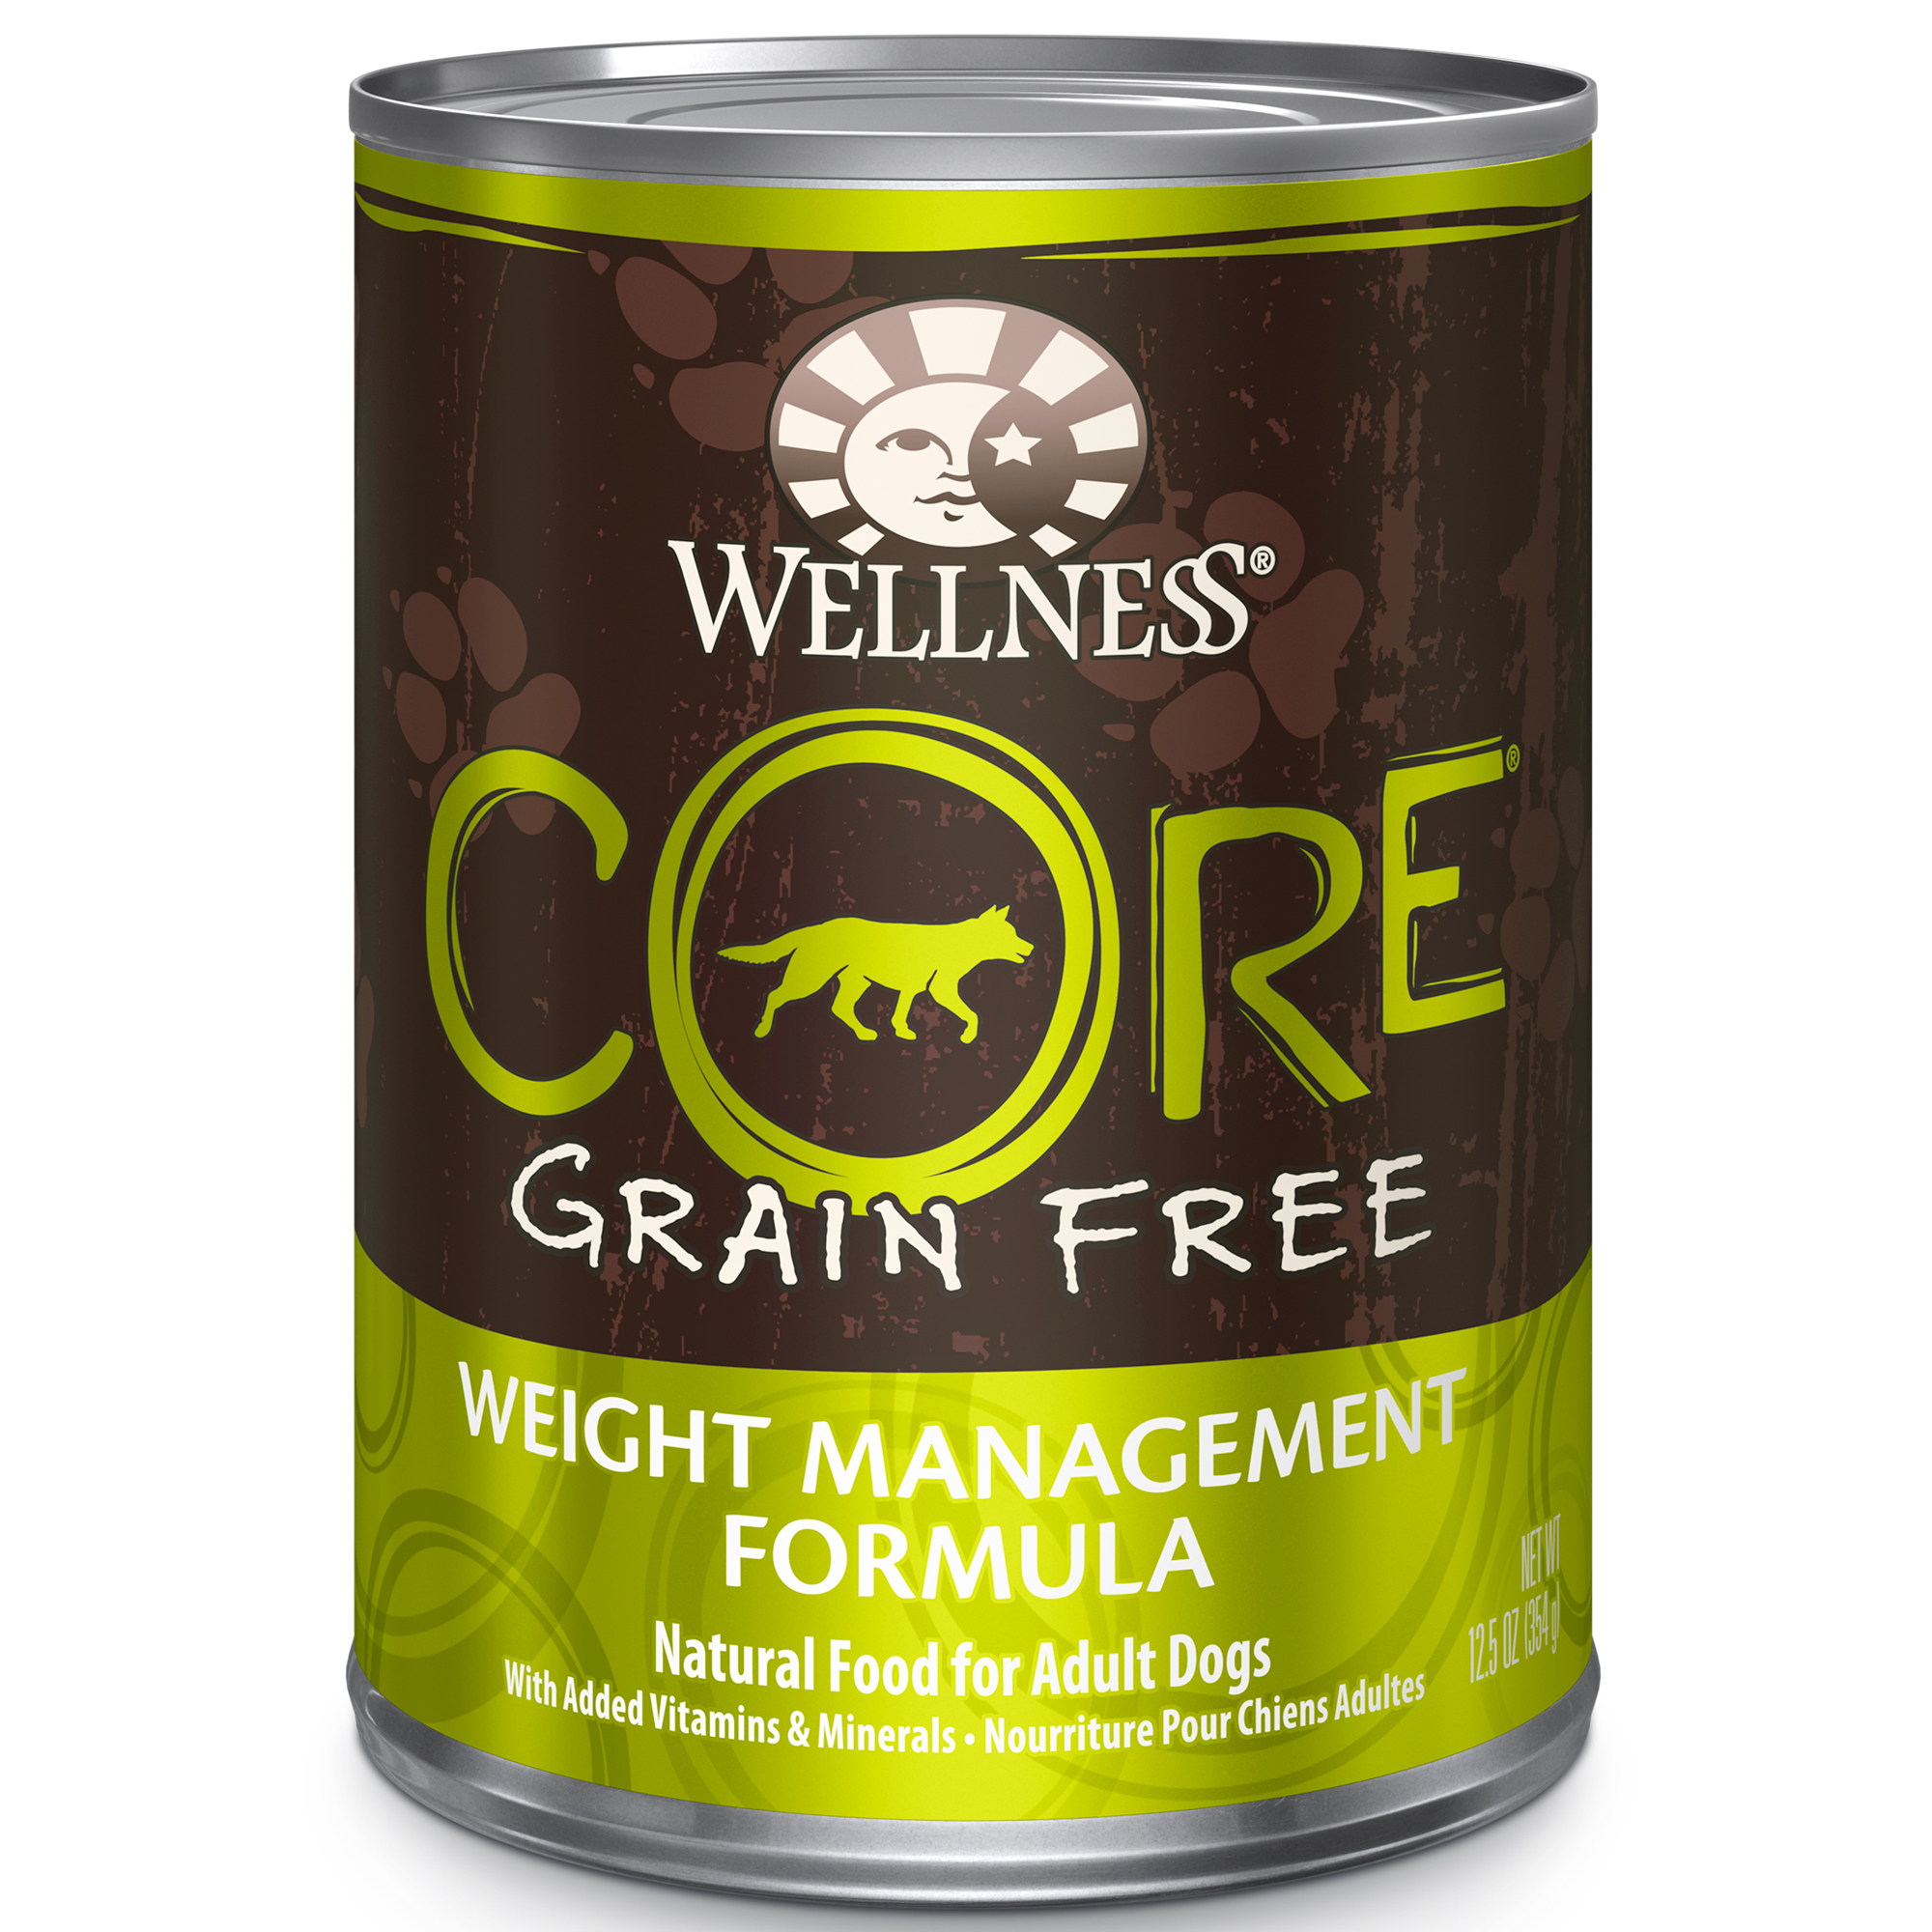 Wellness CORE Natural Wet Grain Free Canned Weight Management Dog Food, 12.5-Ounce Can (Pack of 12) - image 1 of 8